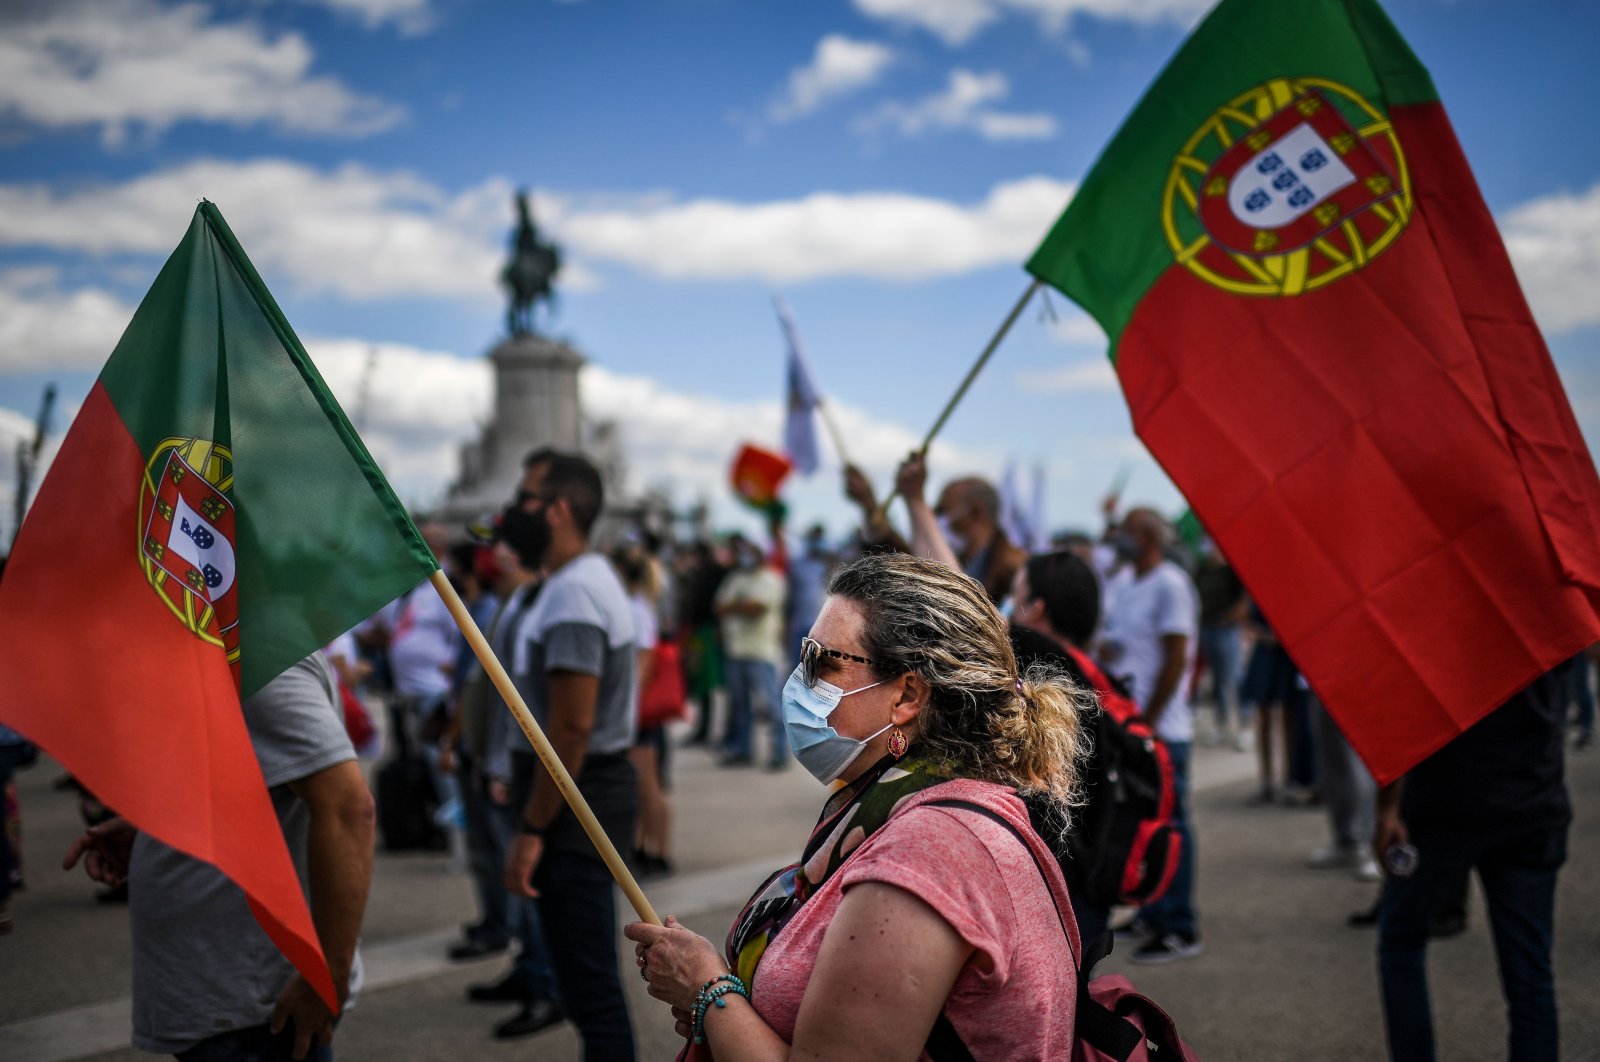 A protester wearing a face mask and a Portuguese flag takes part in a demonstration organised by the Portuguese far-right party Chega in Lisbon on June 27, 2020. (AFP Photo)